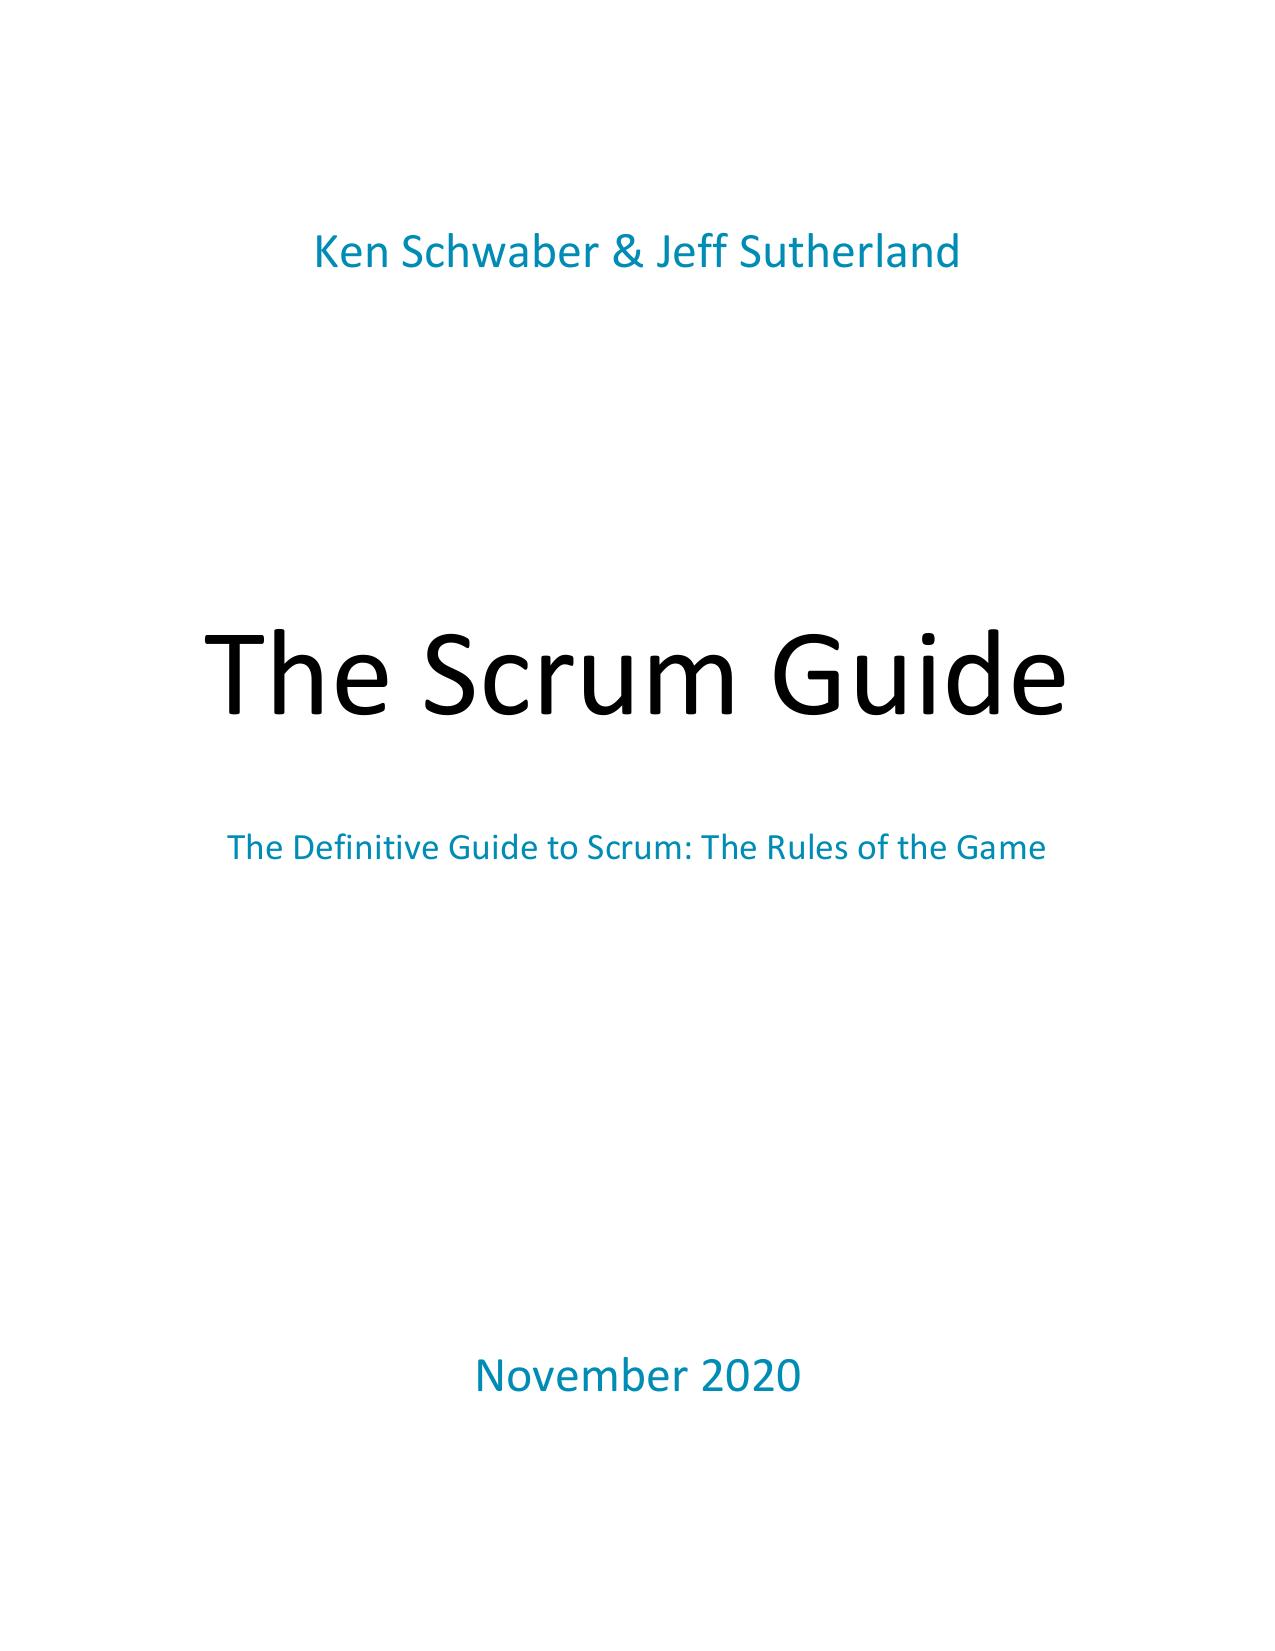 The Scrum Guide The Definitive Guide to Scrum The Rules of the Game by Ken Schwaber and Jeff Sutherland